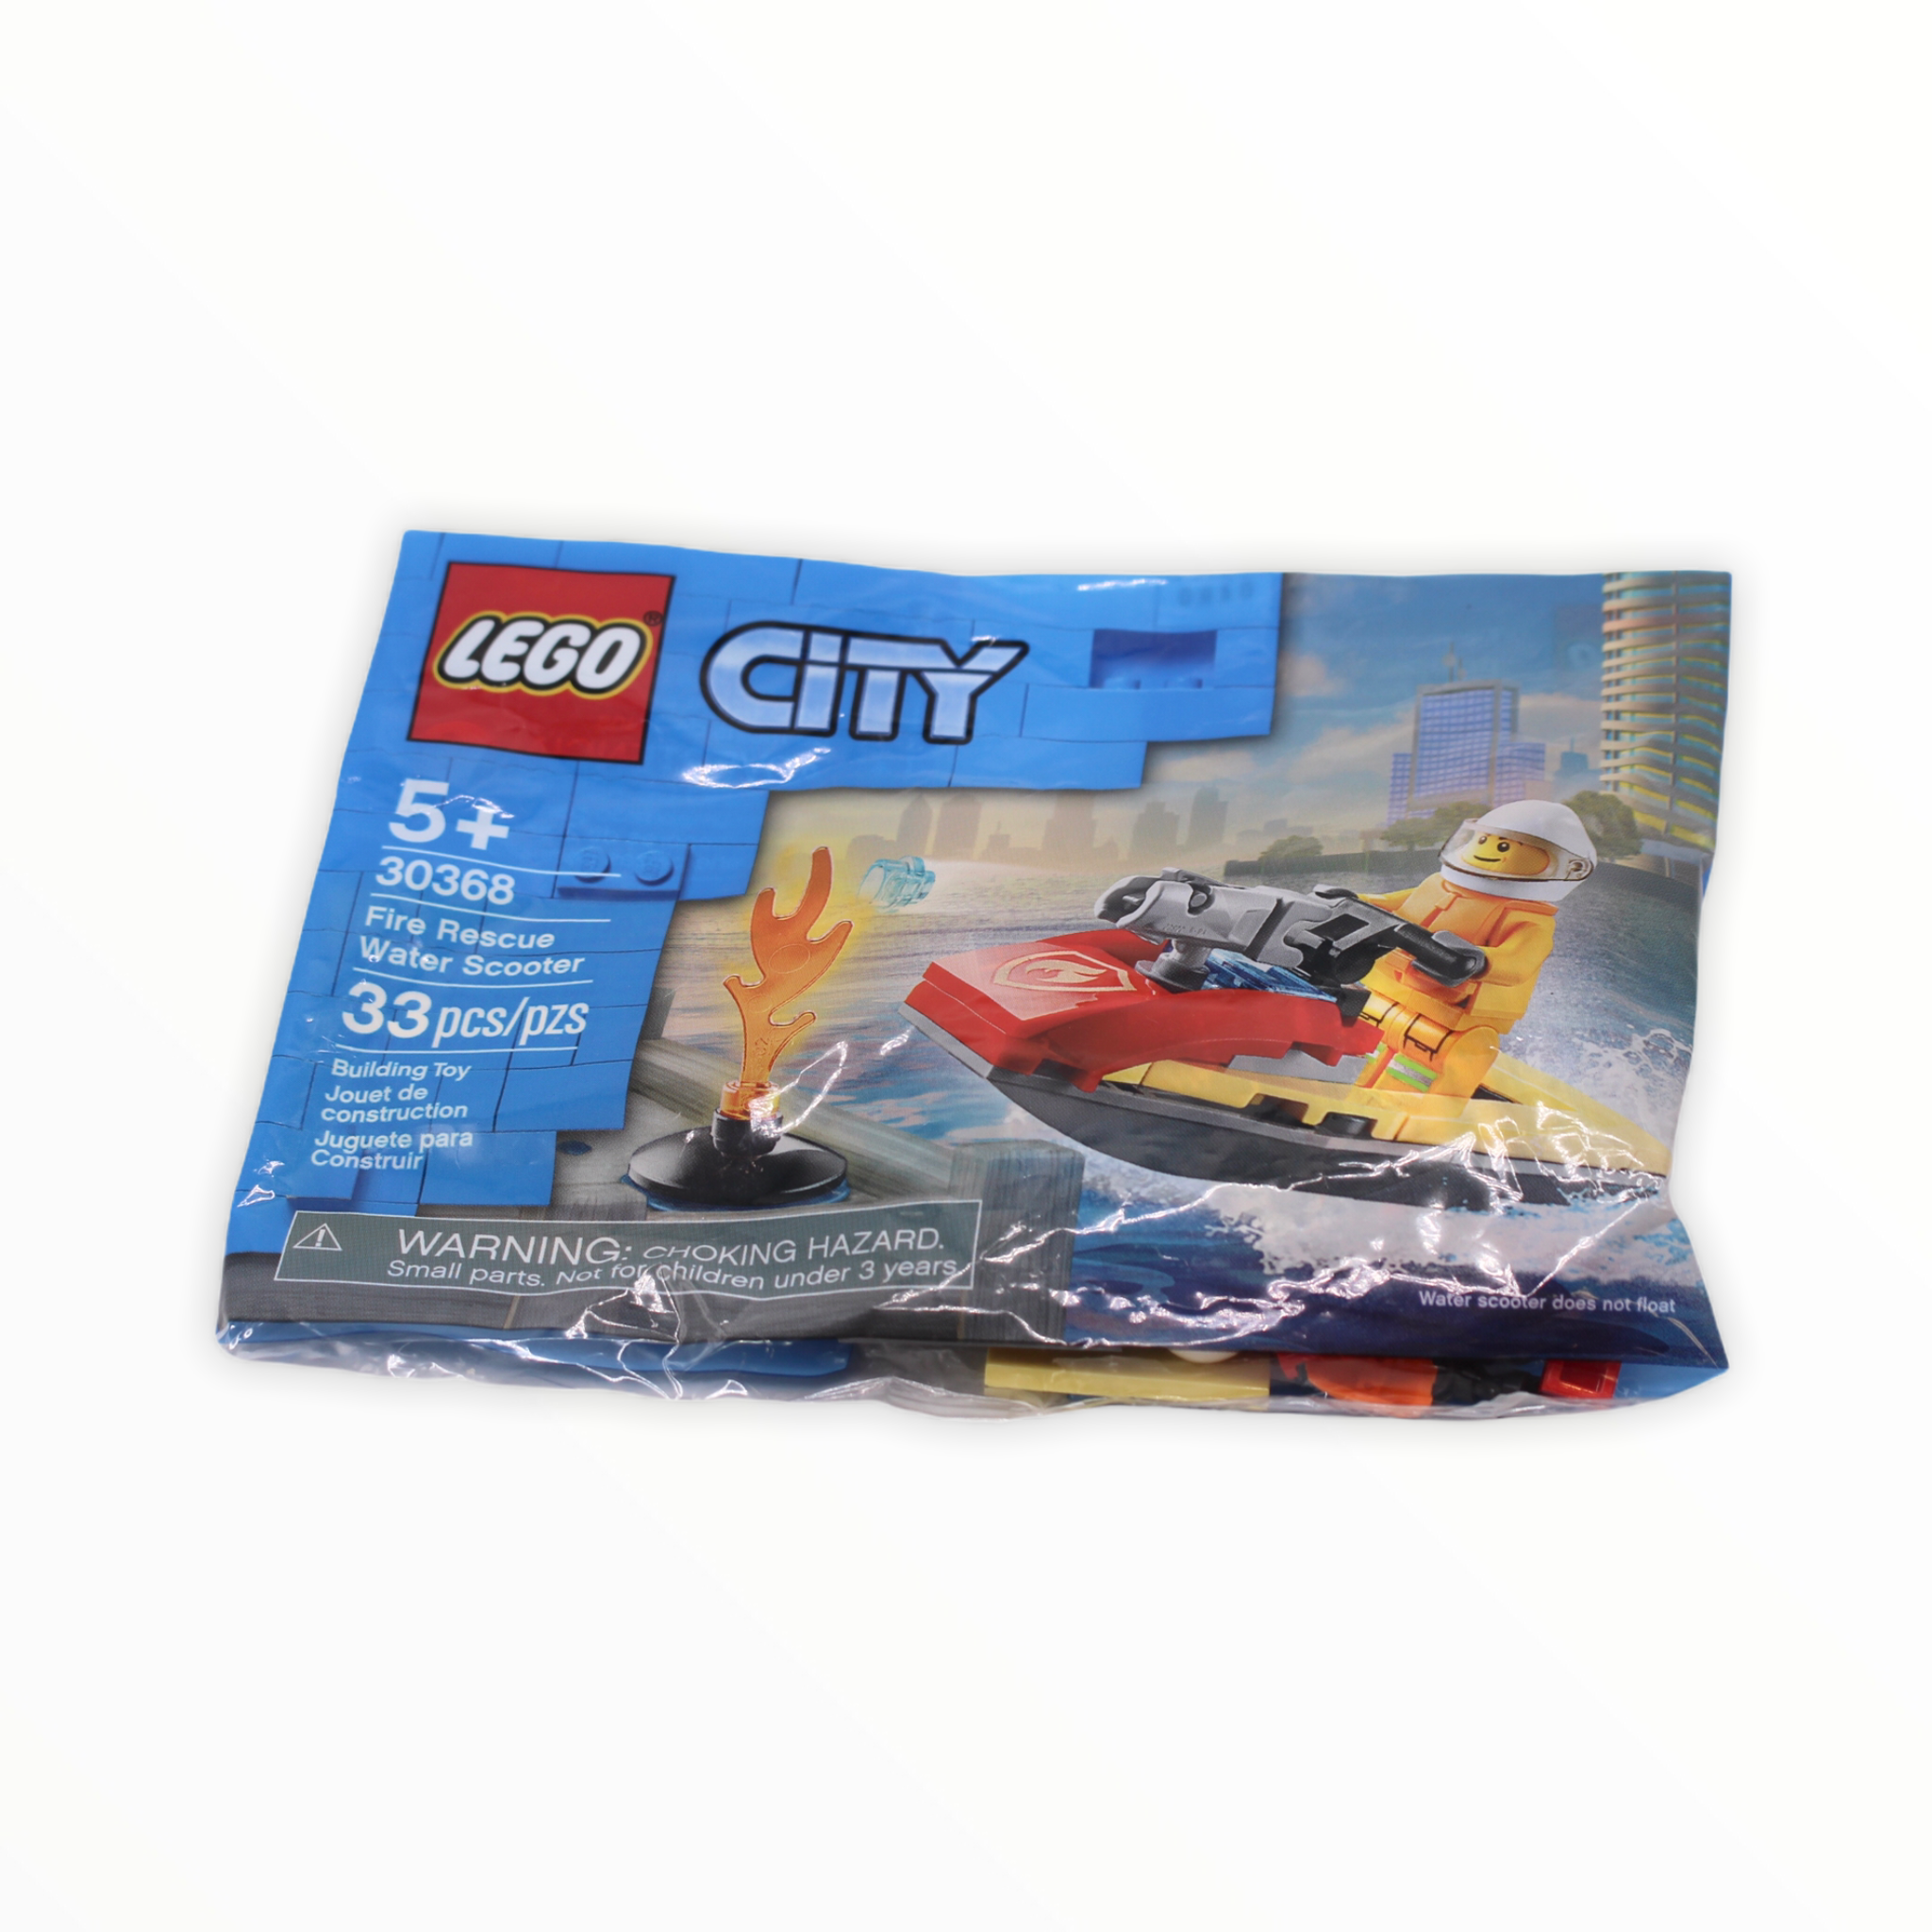 Polybag 30368 City Fire Rescue Water Scooter